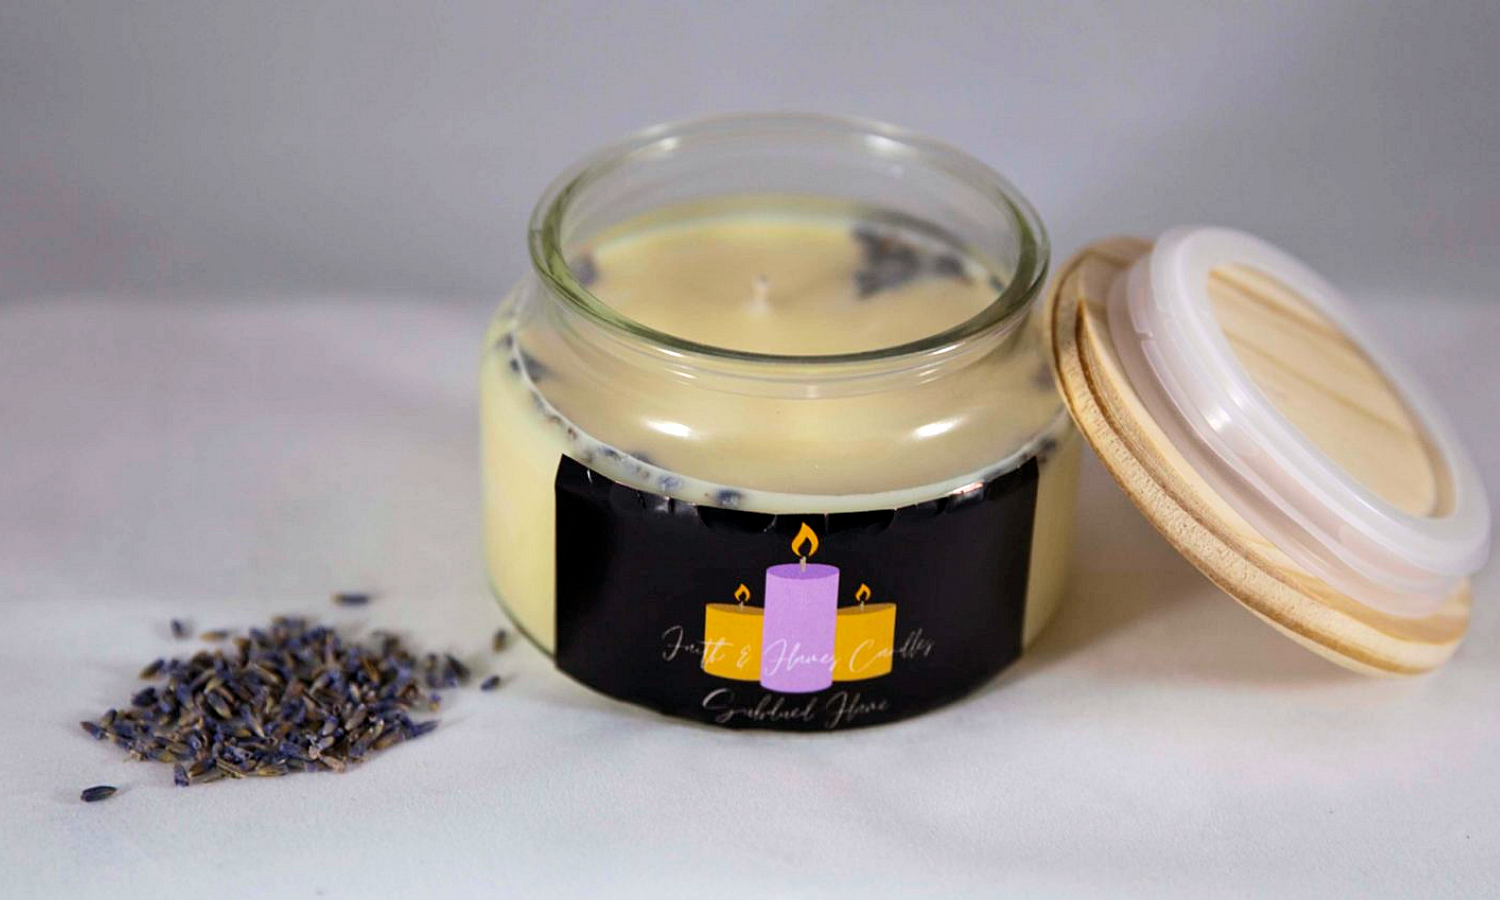 The Subdued Flame’s lavender, rose, and ylang ylang blend can help relax your senses, improve your mood, and get yourself in the right space for restorative activities. This candle is great for relaxation, placing near your spiritual bath, yoga sessions, working on a project, or a chill day on the couch.